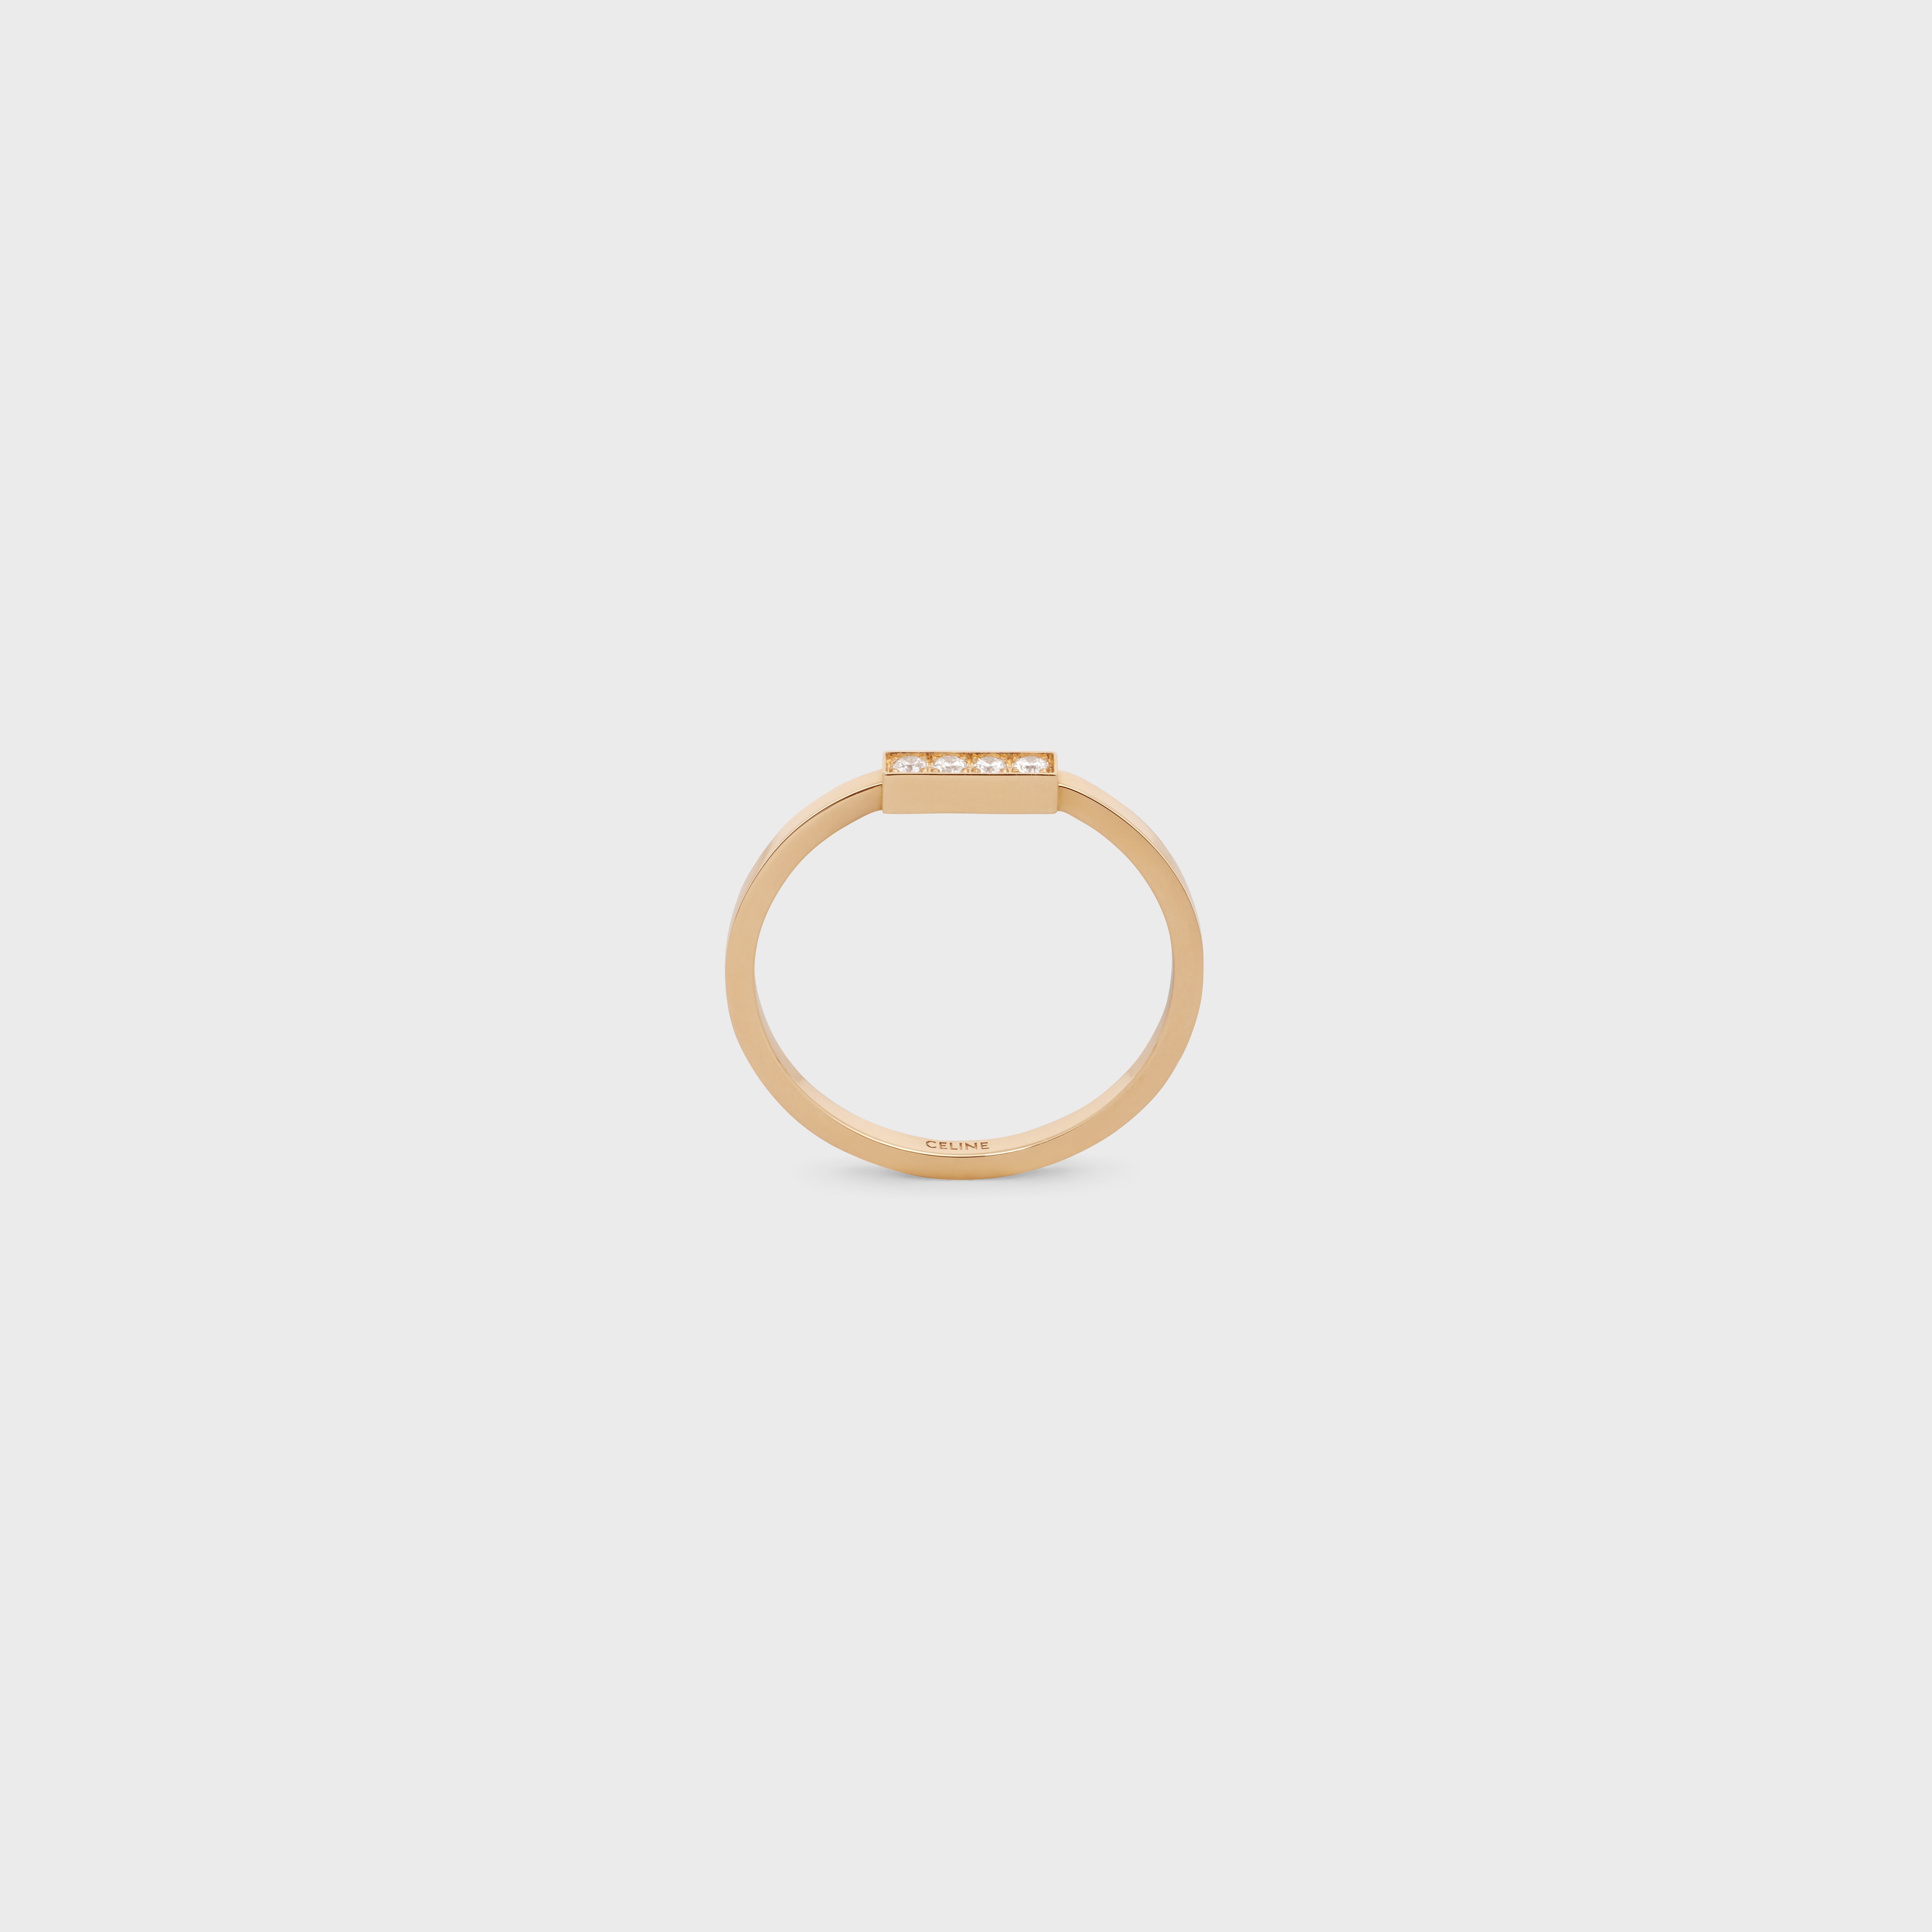 Celine Line Ring in Yellow Gold and Diamonds - 1